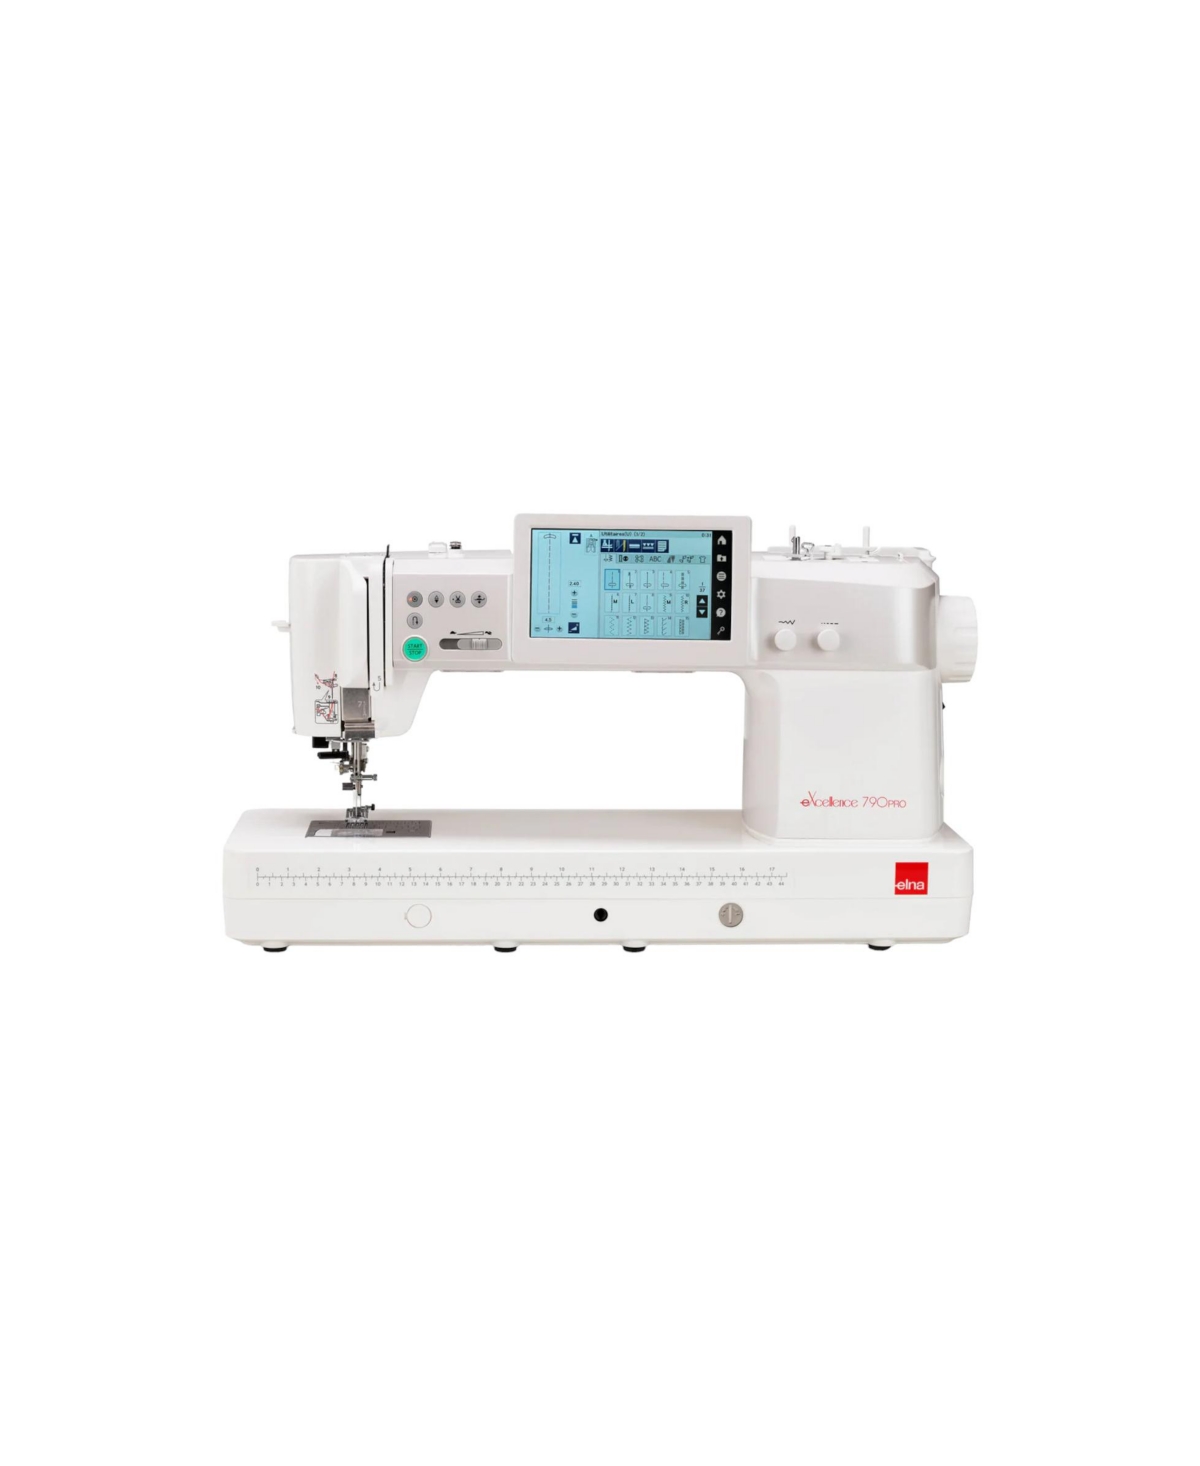 eXcellence 790 Pro Sewing Machine - White